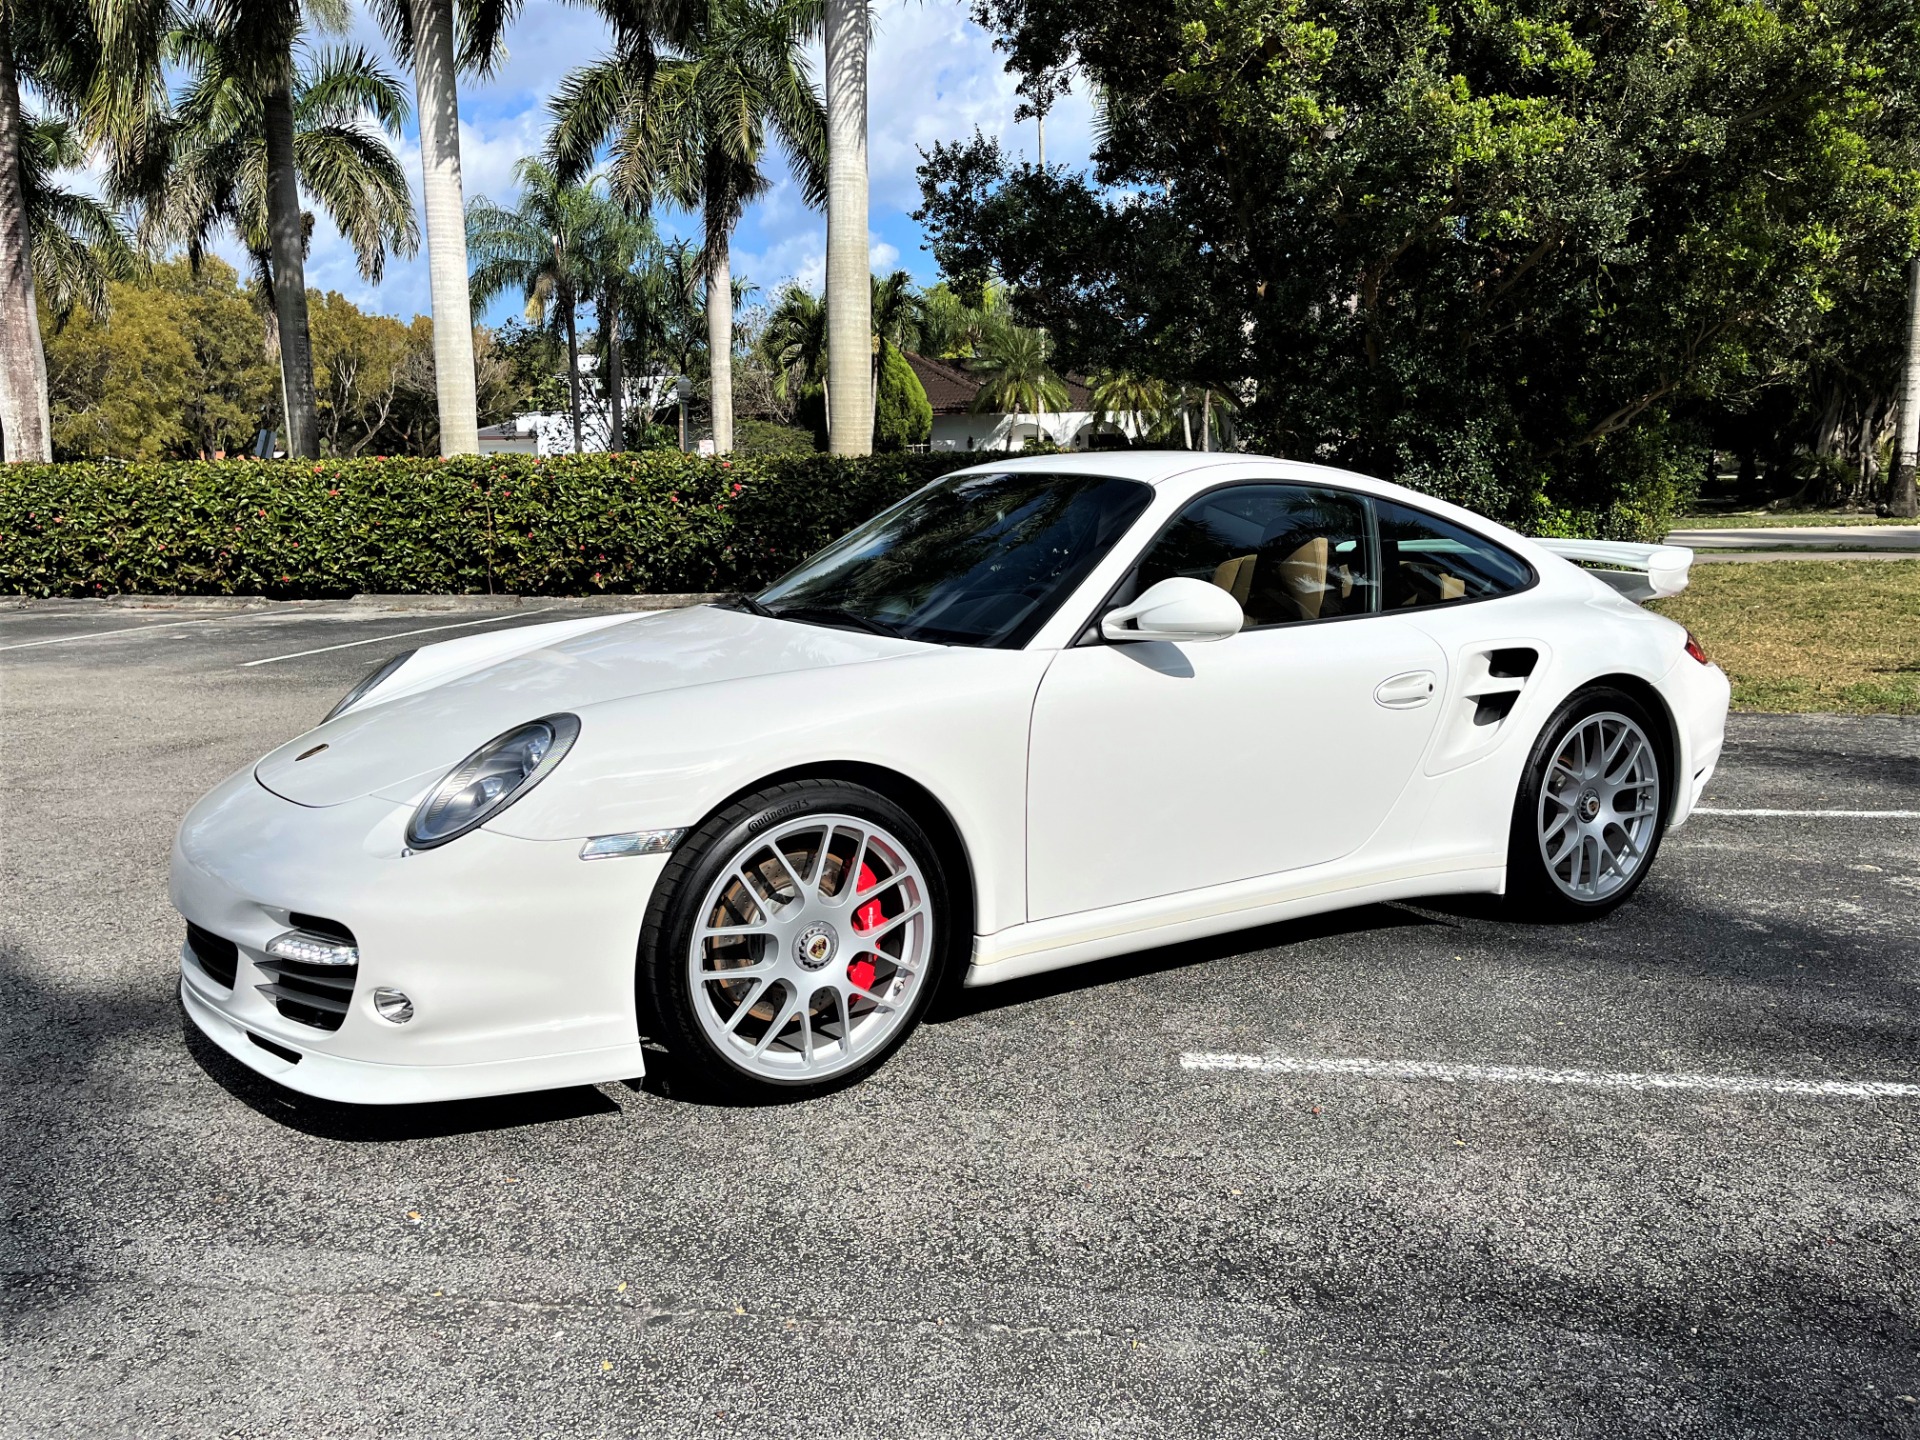 Used 2010 Porsche 911 Turbo for sale Sold at The Gables Sports Cars in Miami FL 33146 2